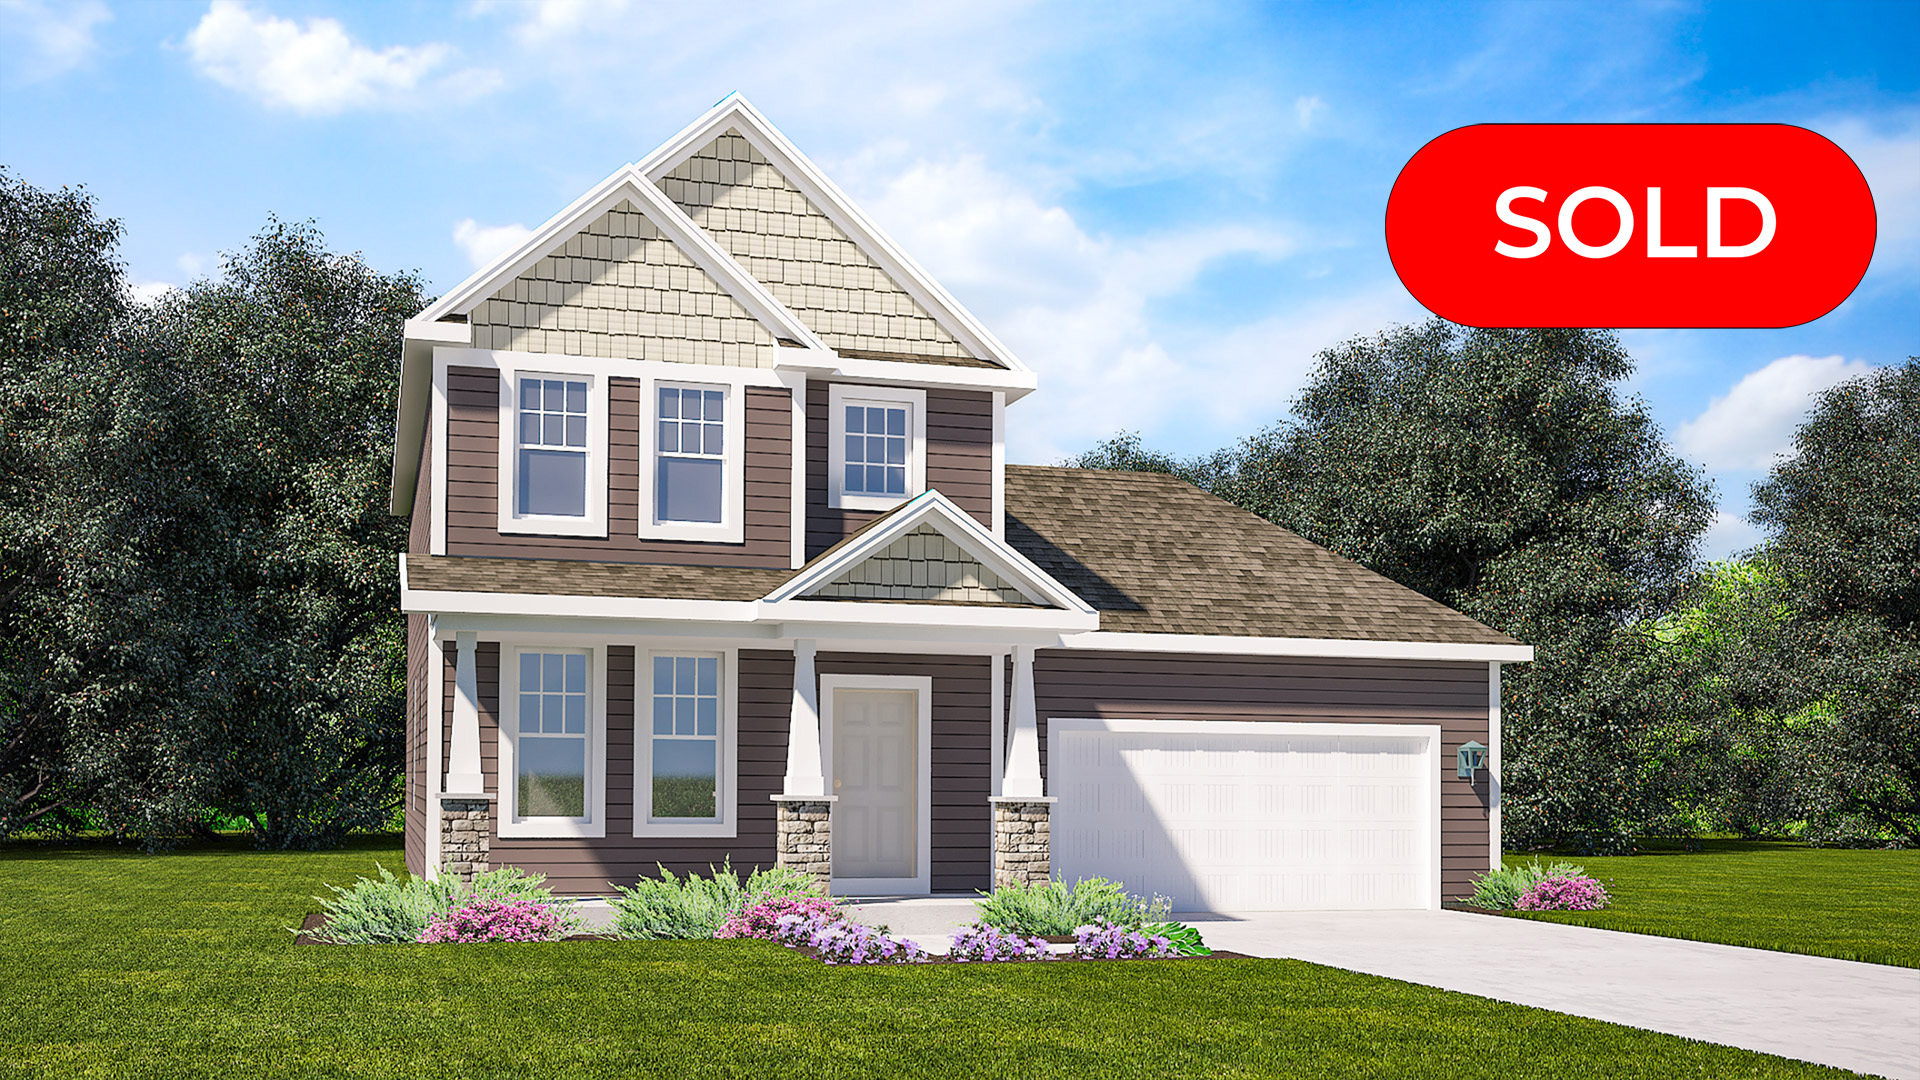 The Willow Home Model Rendering by Stepping Stone Homes